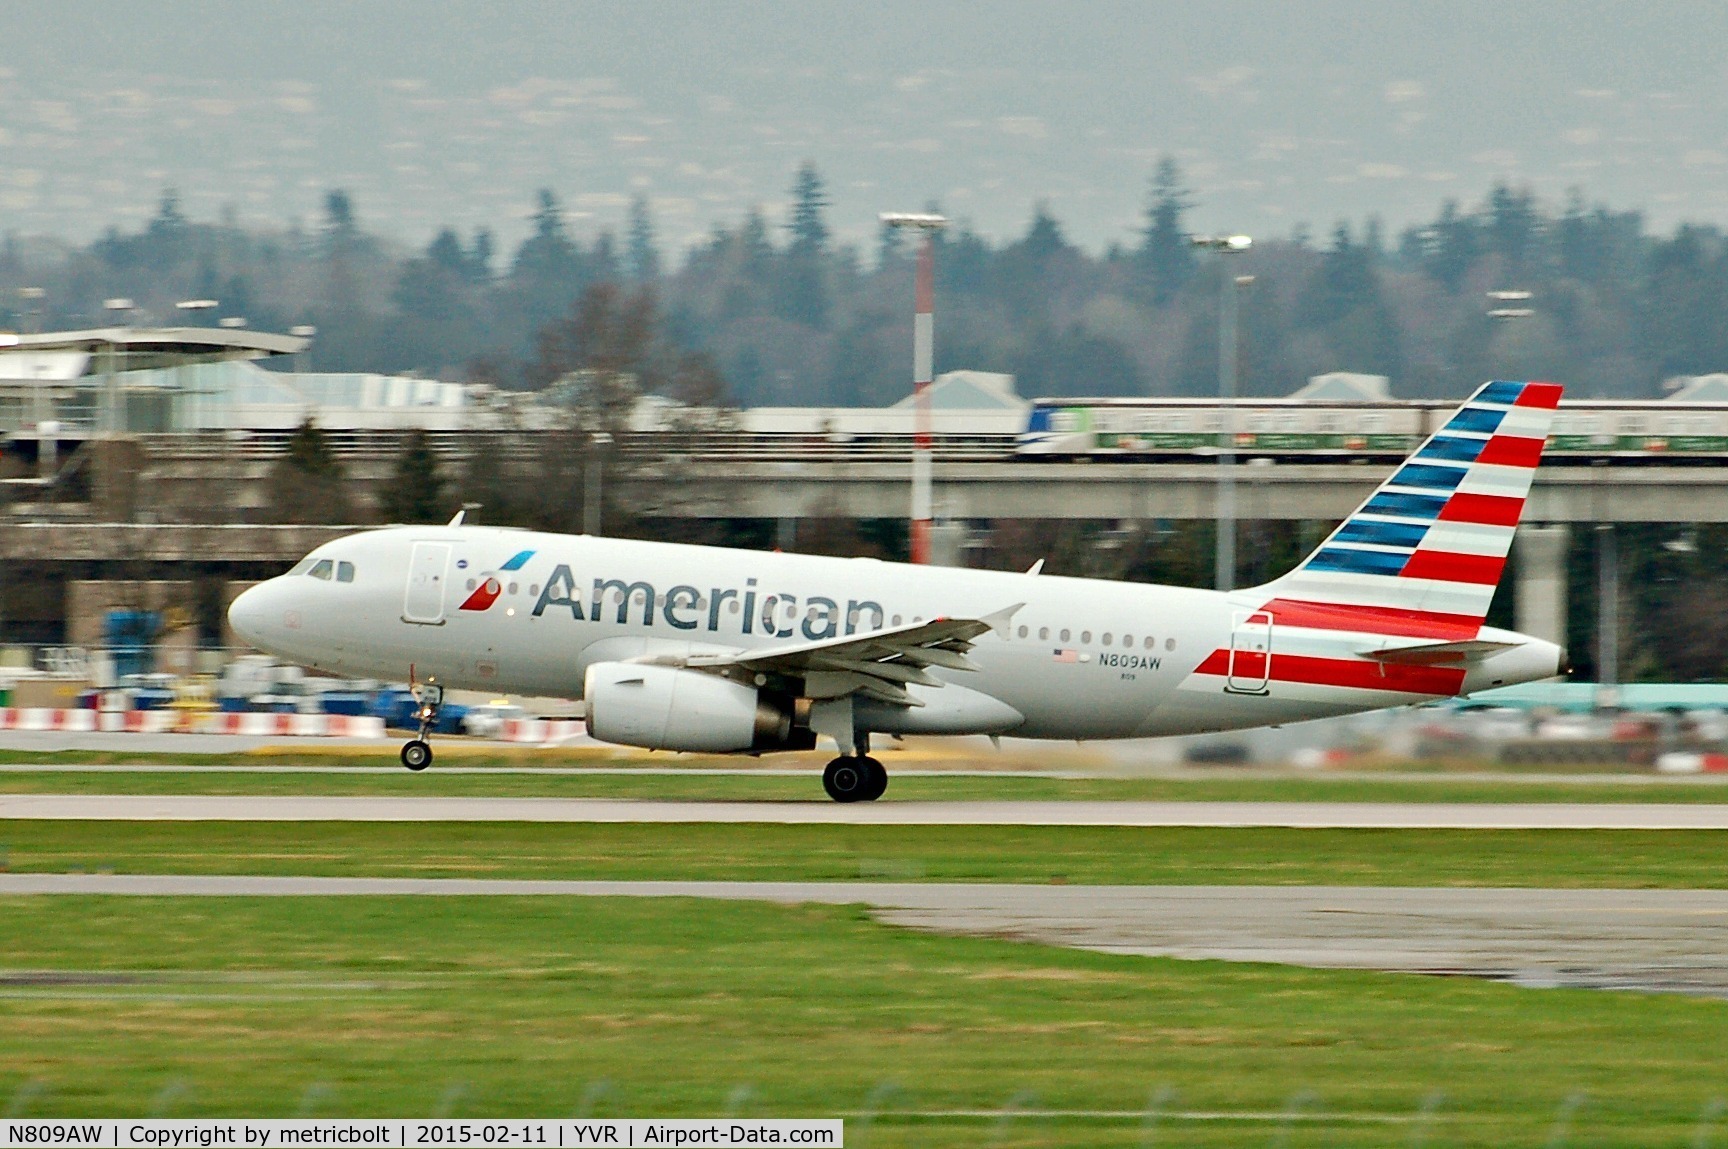 N809AW, 1999 Airbus A319-132 C/N 1111, Now in American livery,operating US418 to PHX